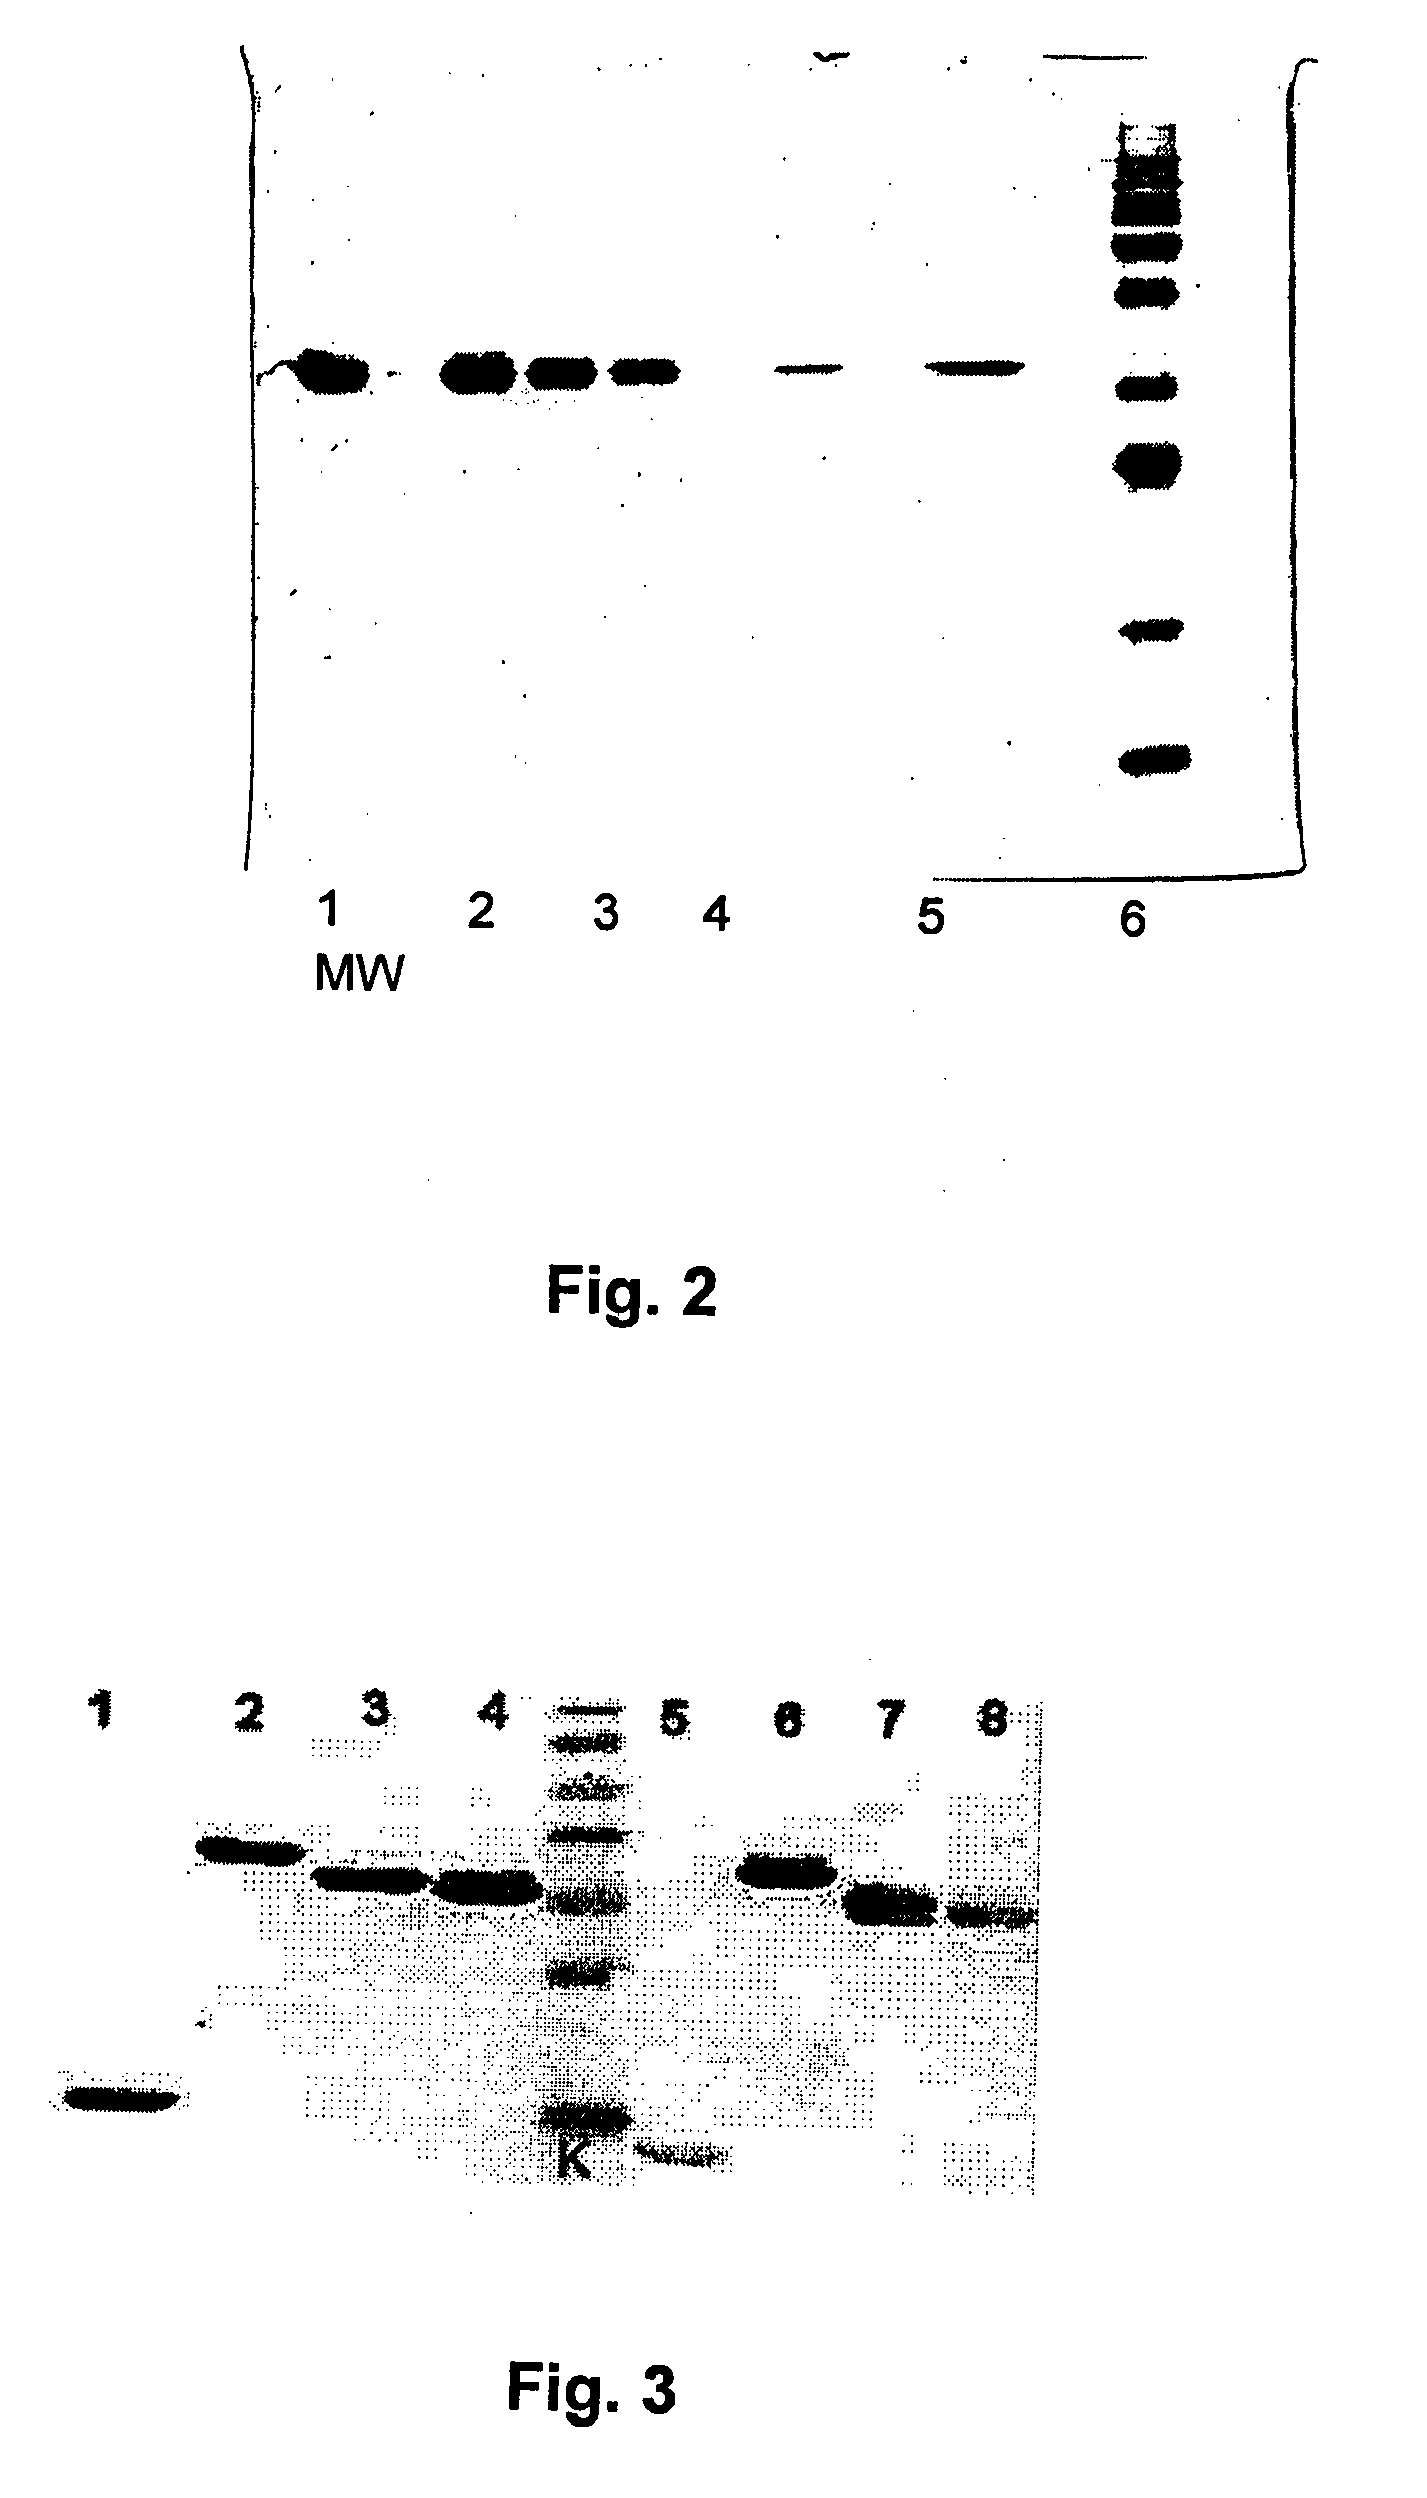 Derivatives of recombinant proteins, homo-multimers of granulocyte colony-stimulating factor and method of preparation thereof